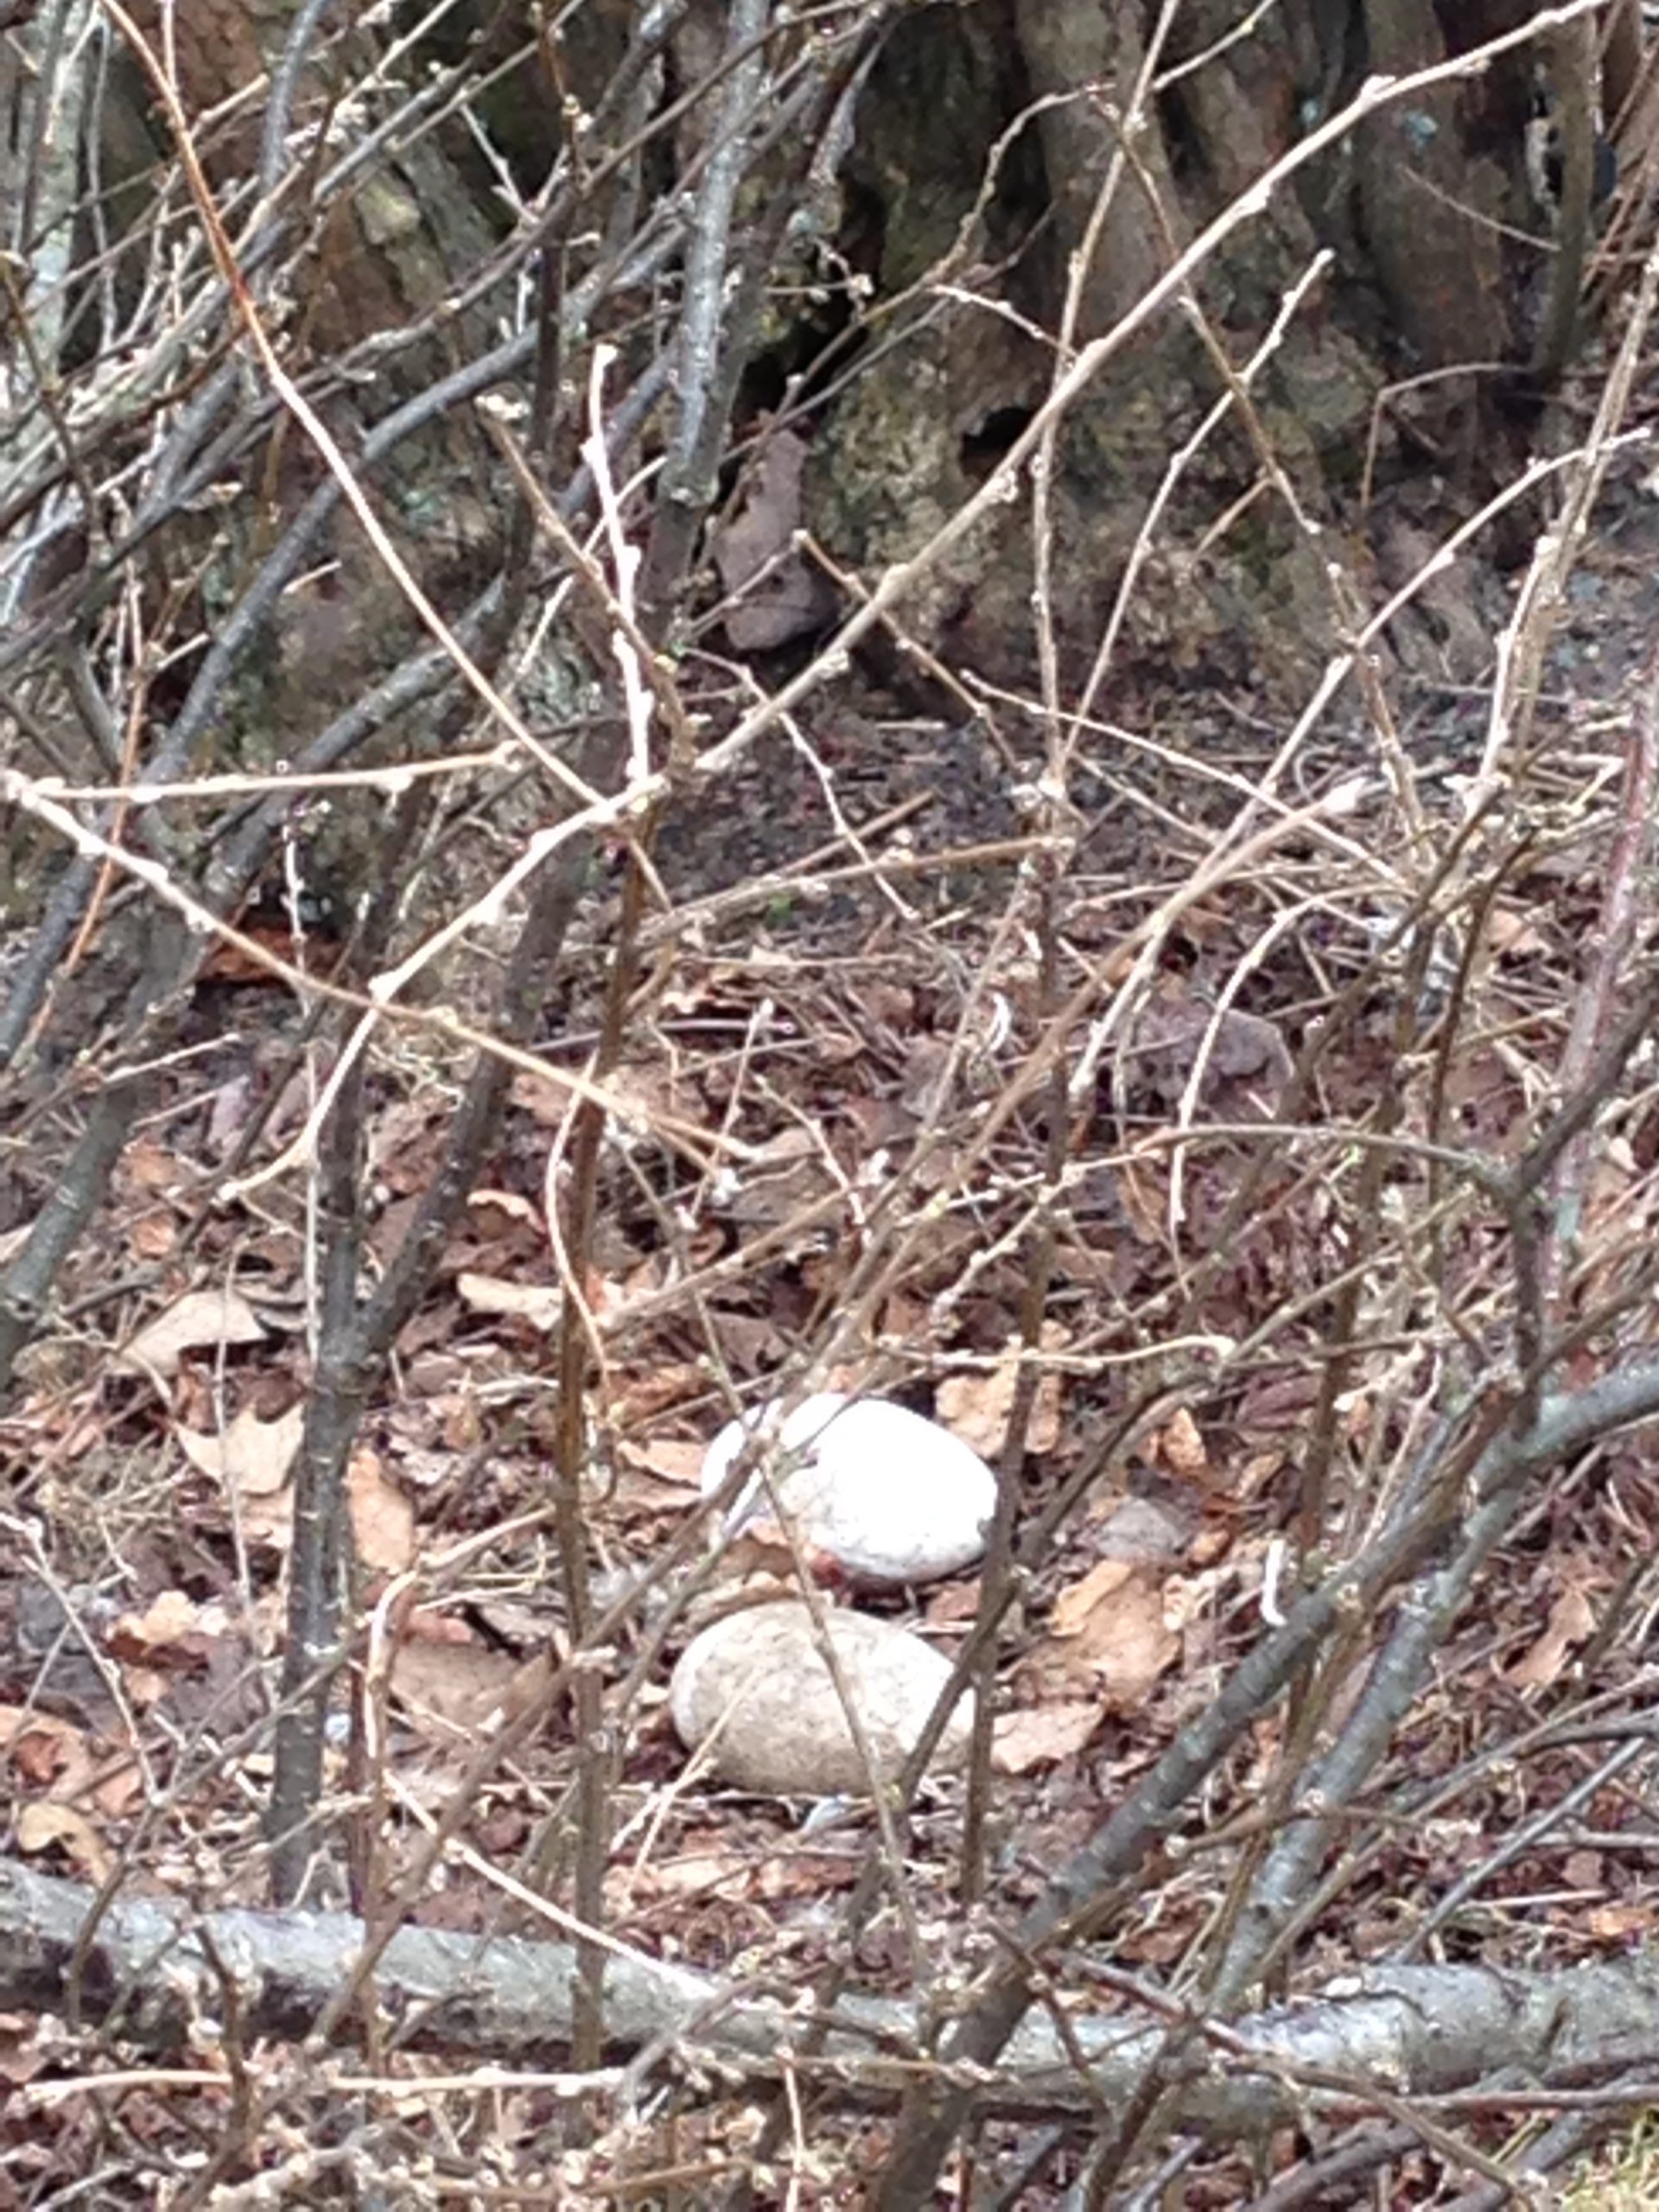 Photo shows two large white eggs on the ground in a wooded area.